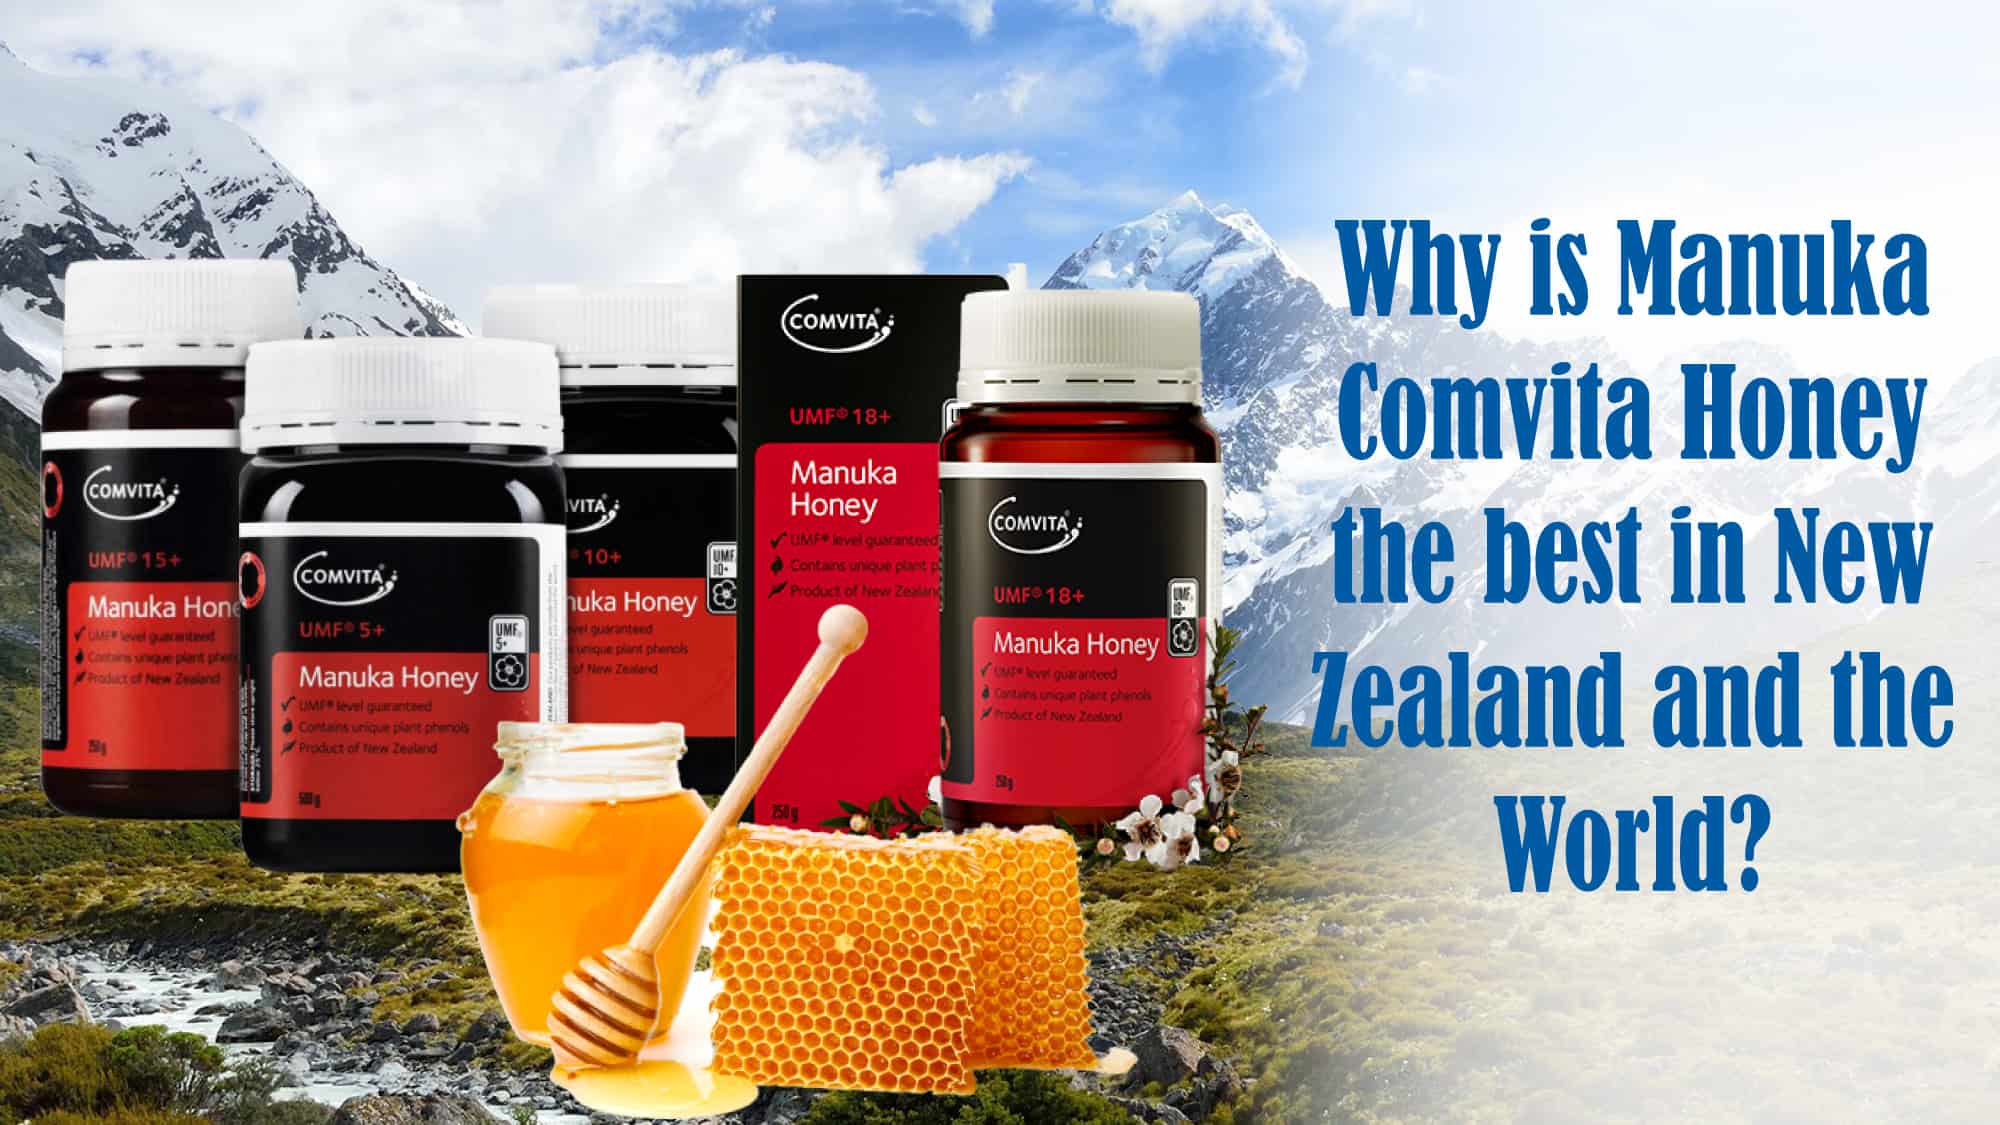 Why is Comvita anuka honey the best in New Zealand and the world?